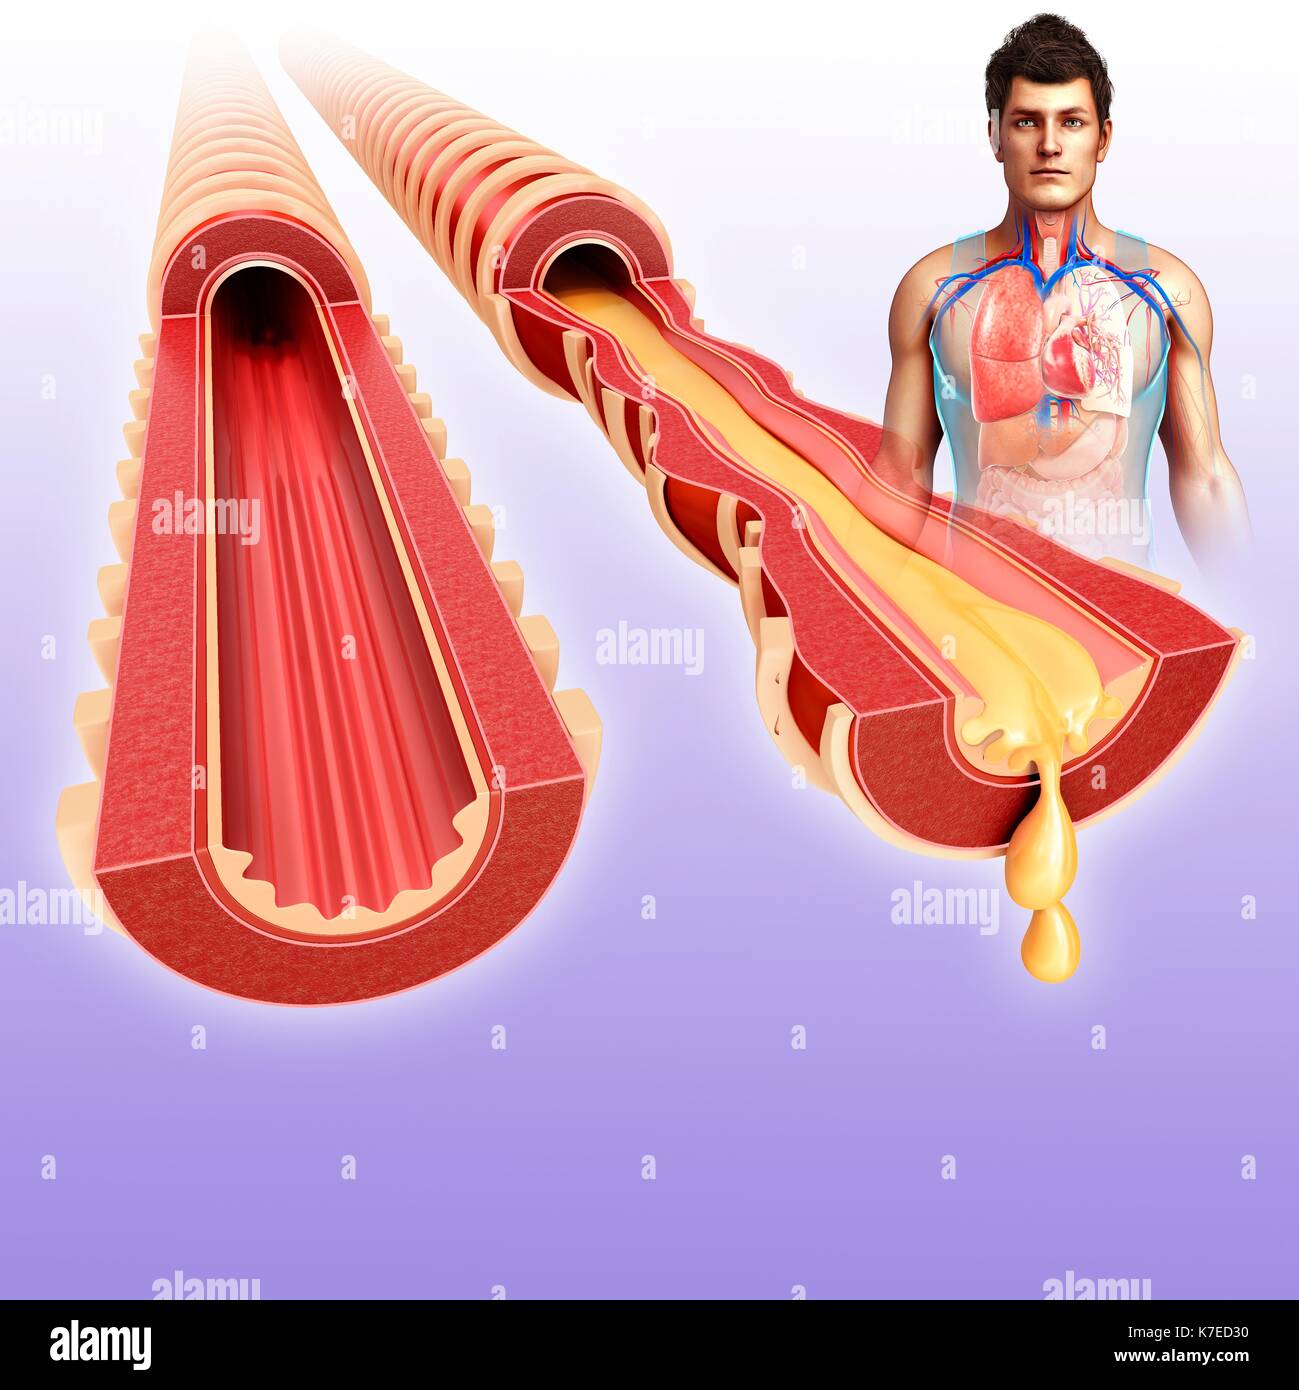 Illustration of a man's normal and infected bronchi. Stock Photo